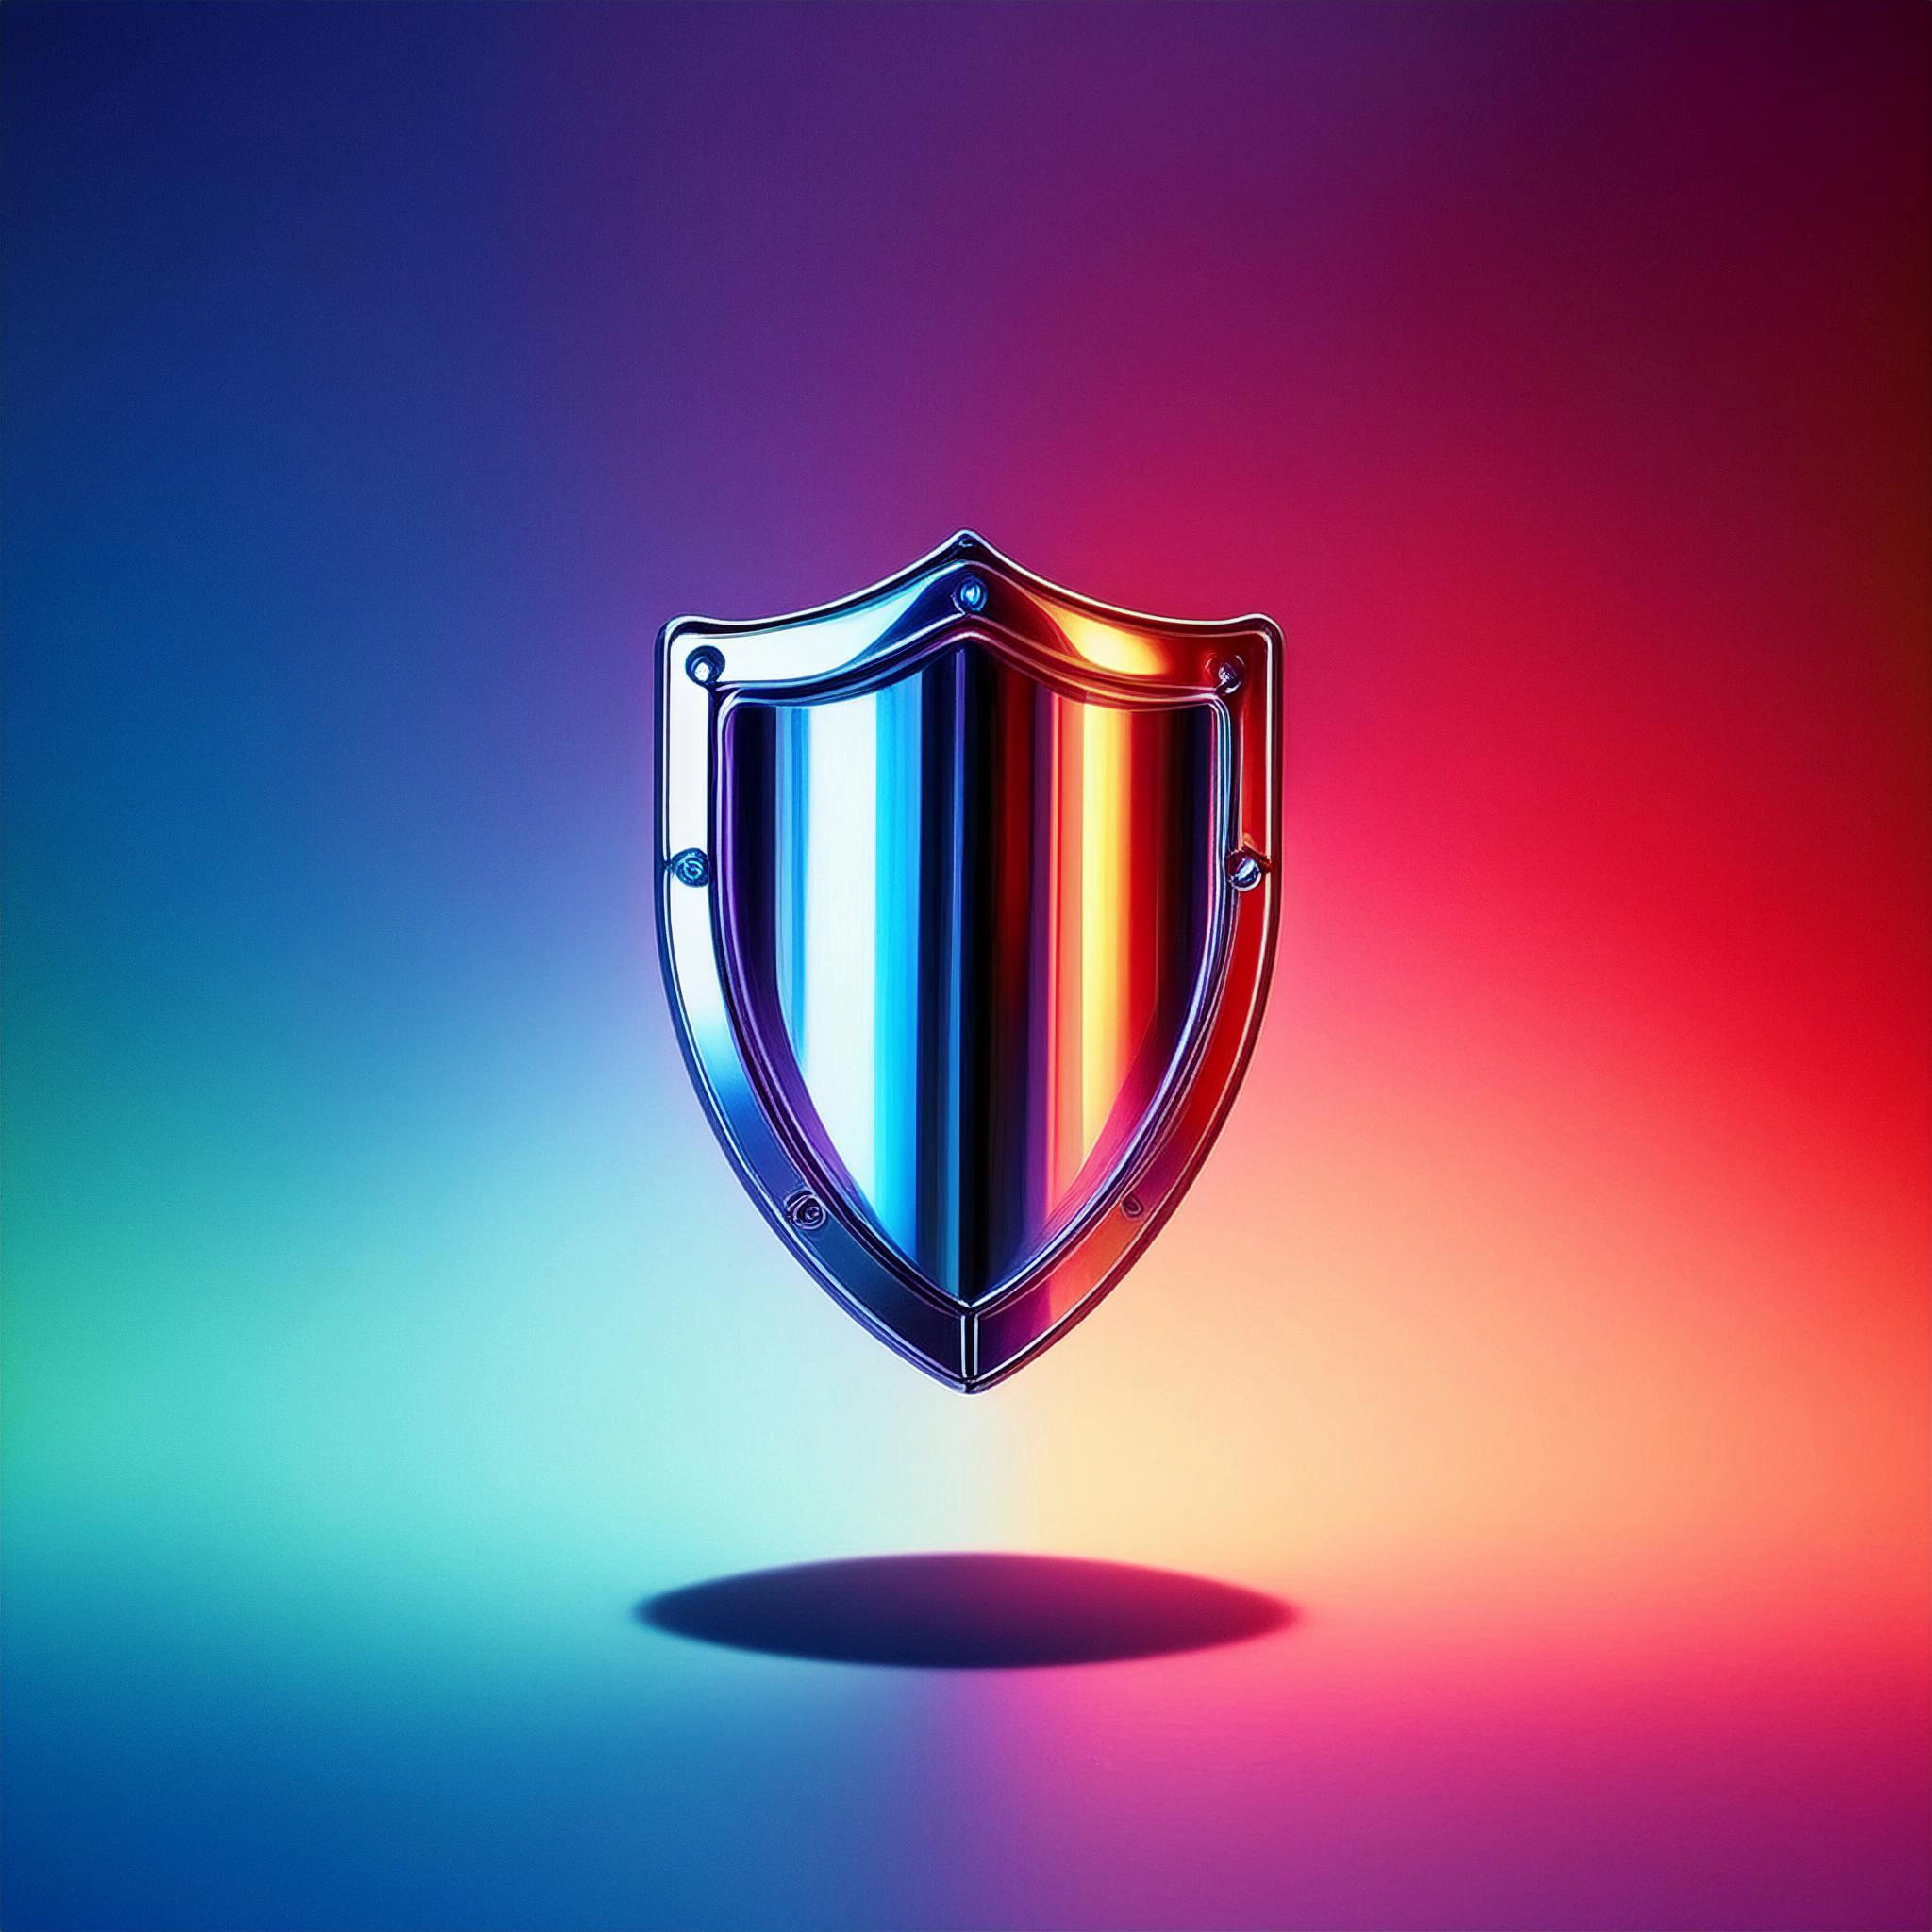 floating metallic shield with blue, purple and red gradient background